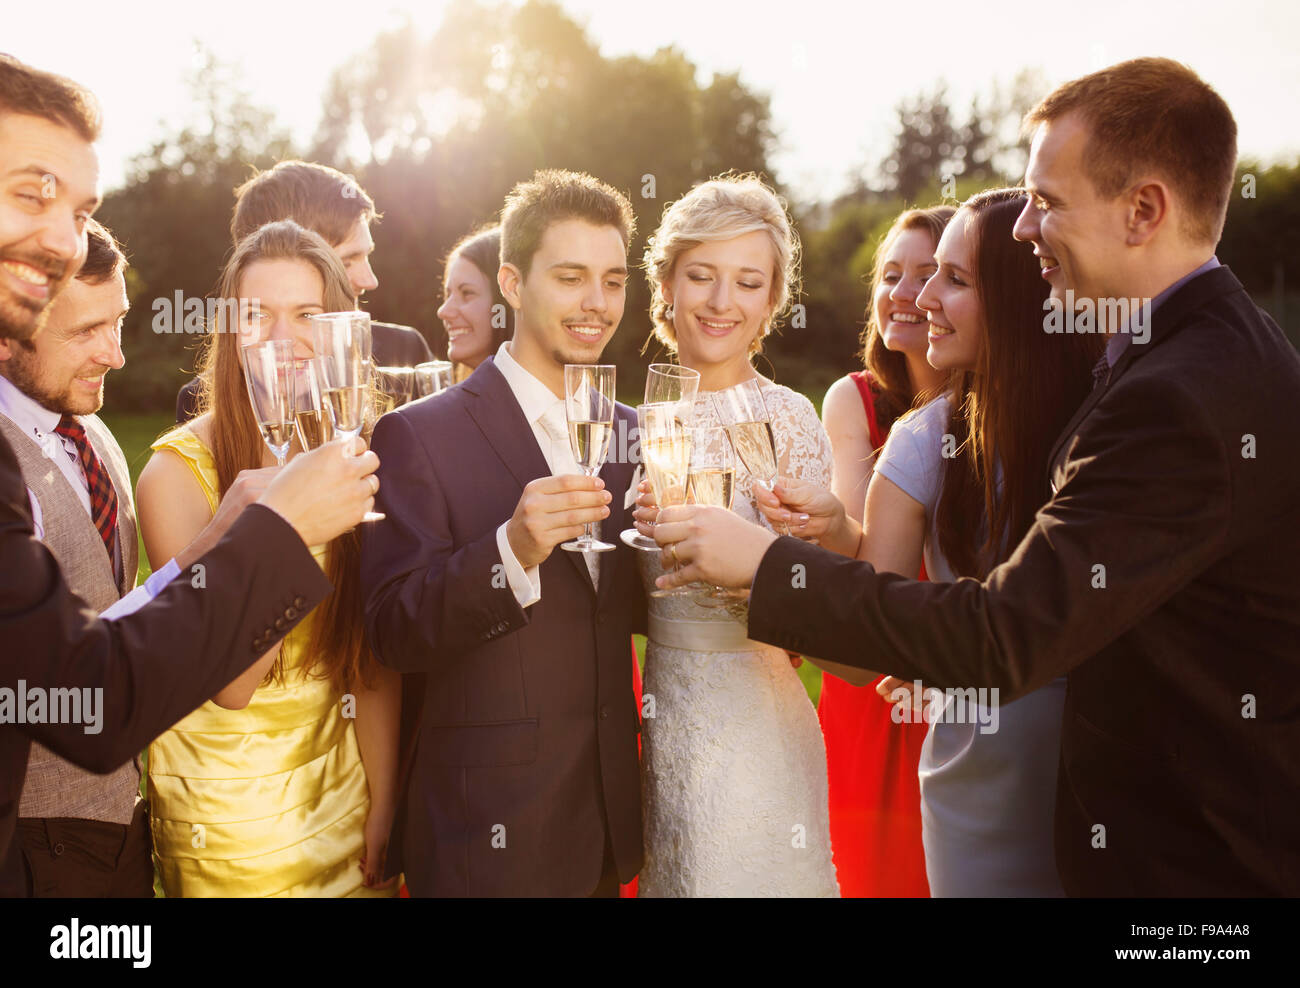 Wedding guests clinking glasses with the newlyweds at the wedding reception outside Stock Photo